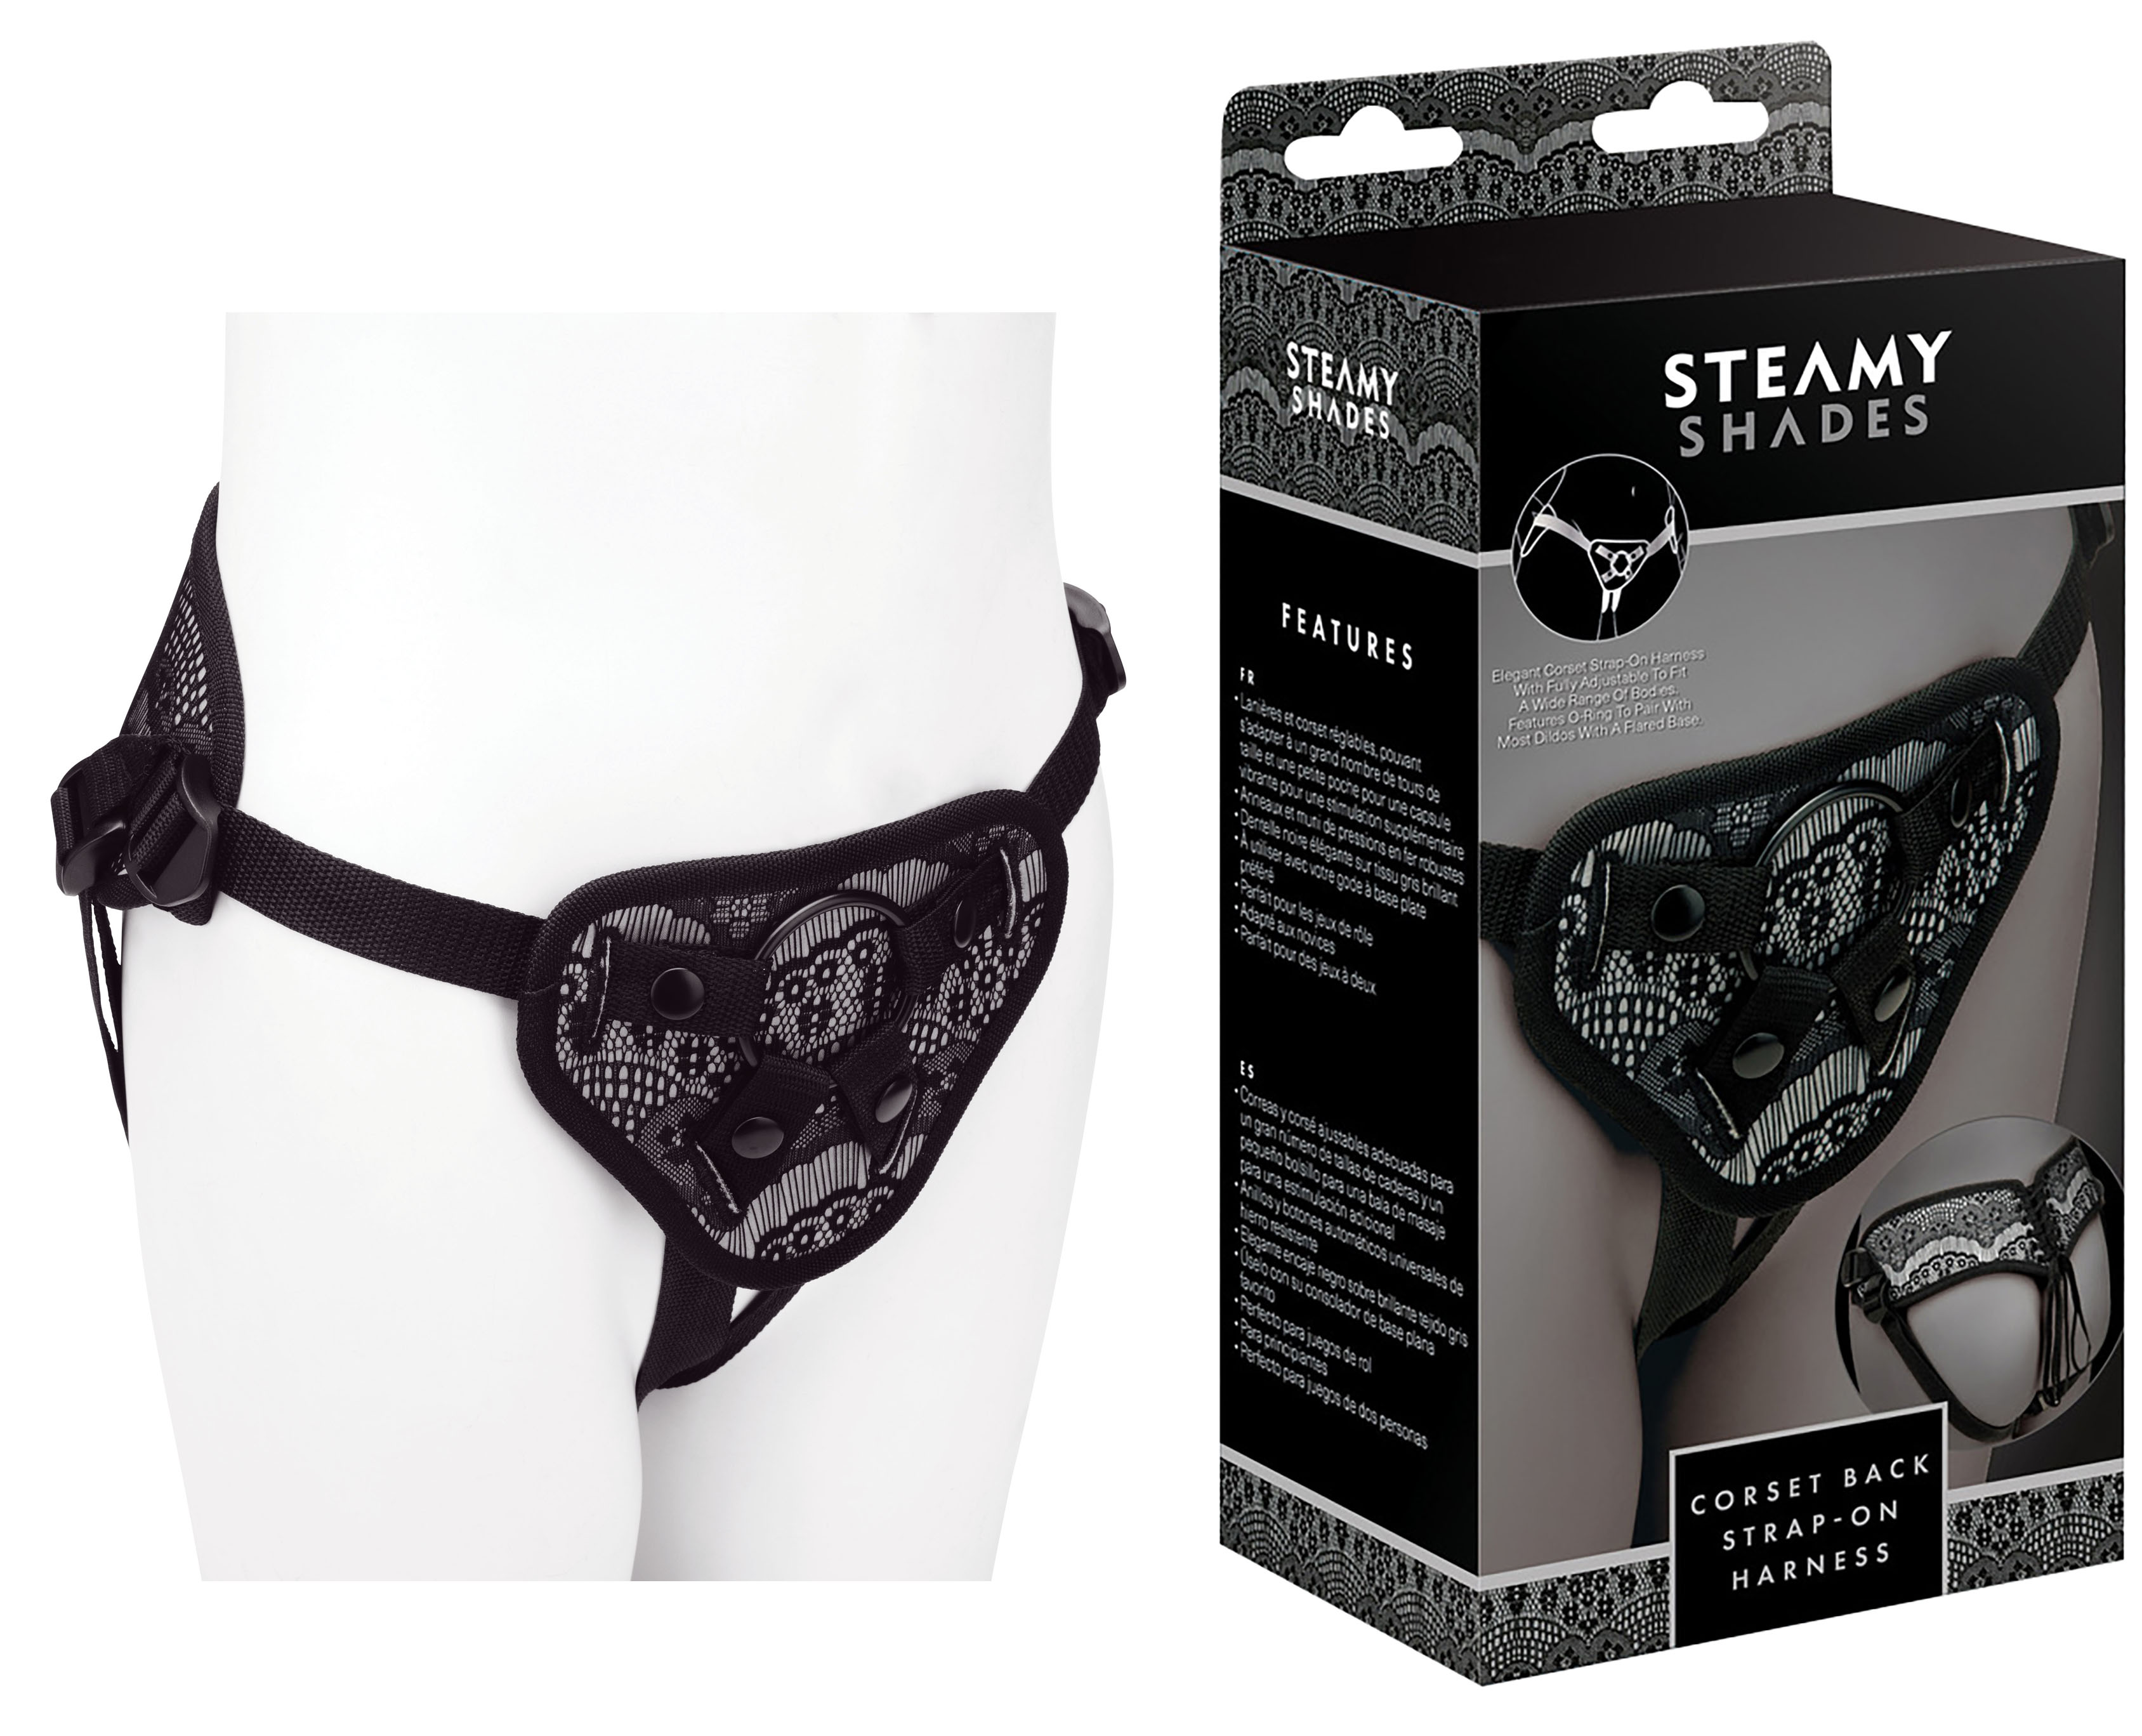 STEAMY SHADES Corset Back Strap On Harness